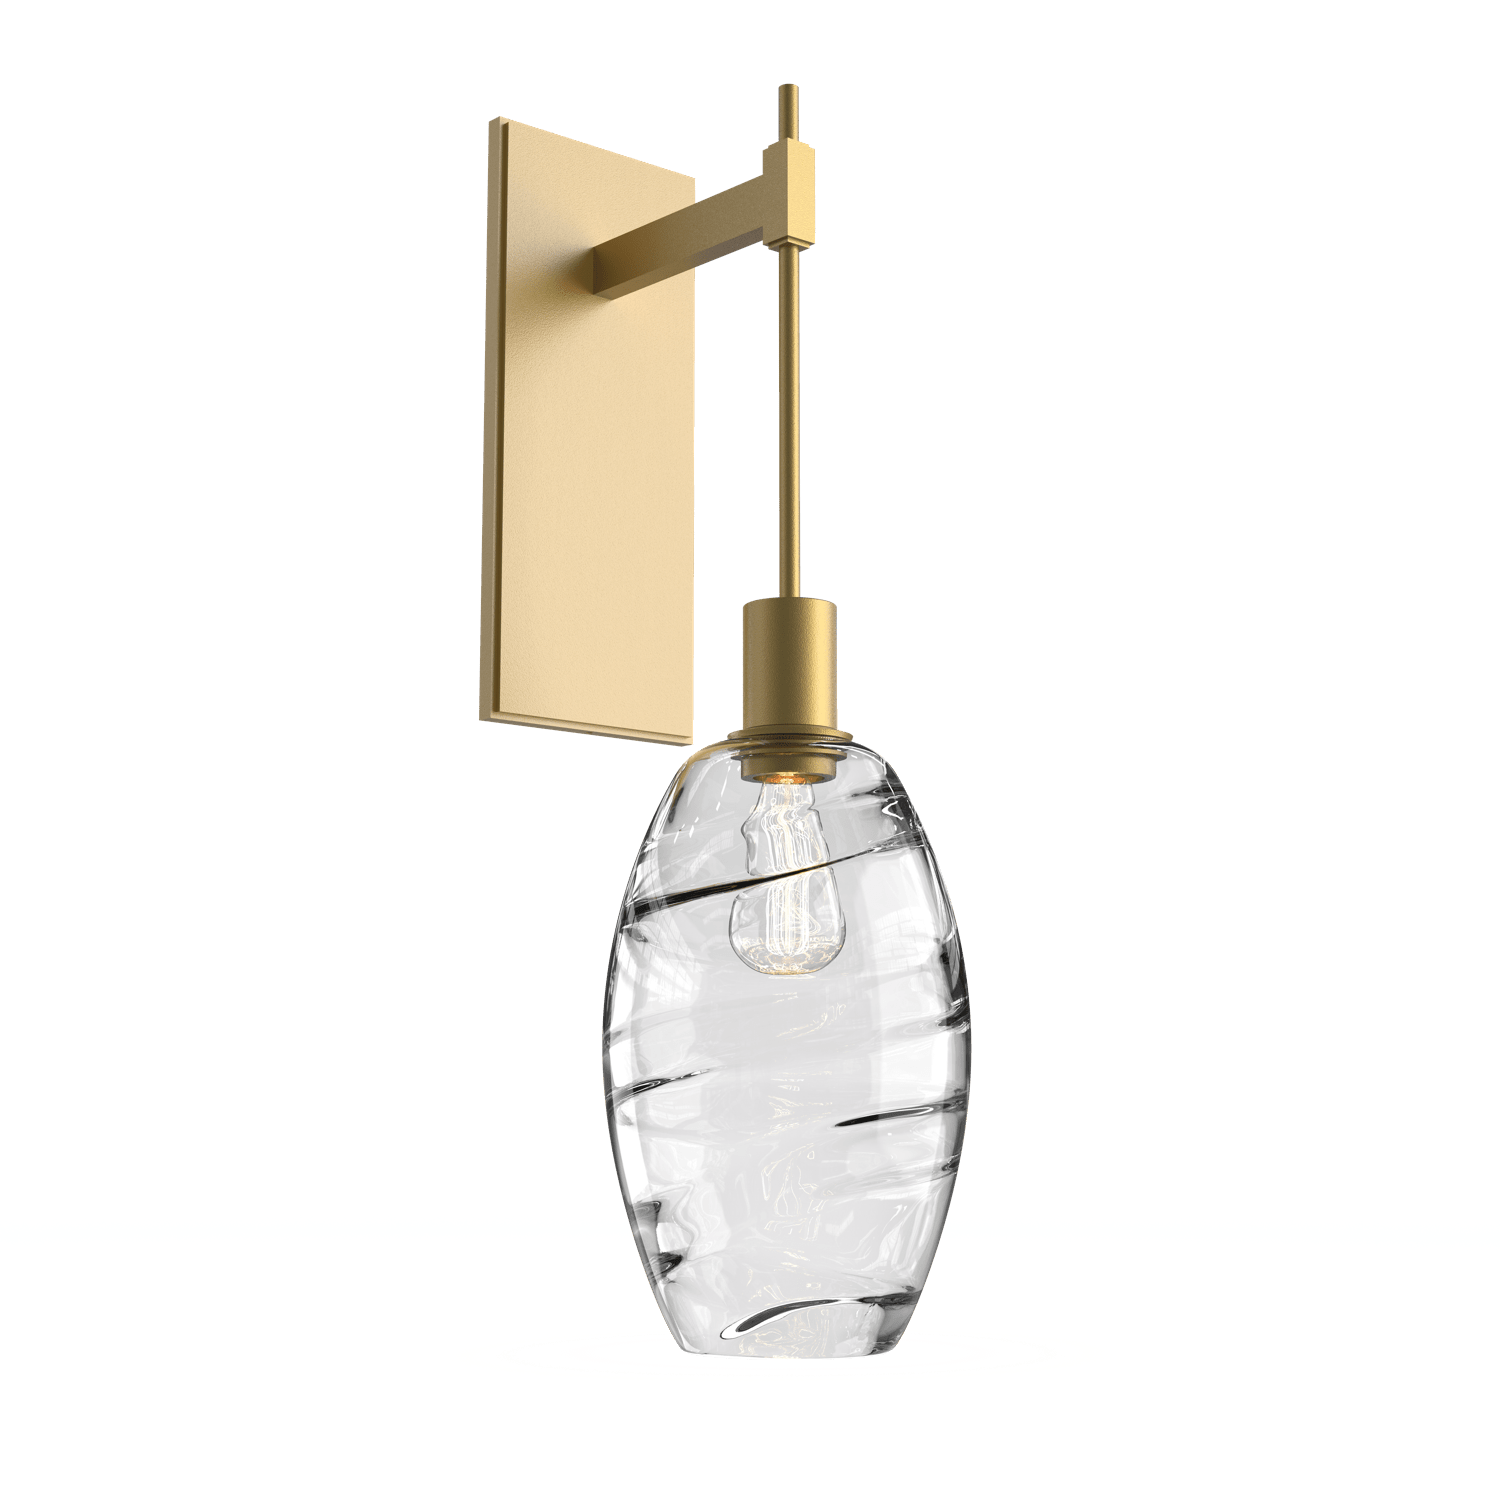 IDB0035-24-GB-OC-Hammerton-Studio-Optic-Blown-Glass-Elisse-tempo-wall-sconce-with-gilded-brass-finish-and-optic-clear-blown-glass-shades-and-incandescent-lamping